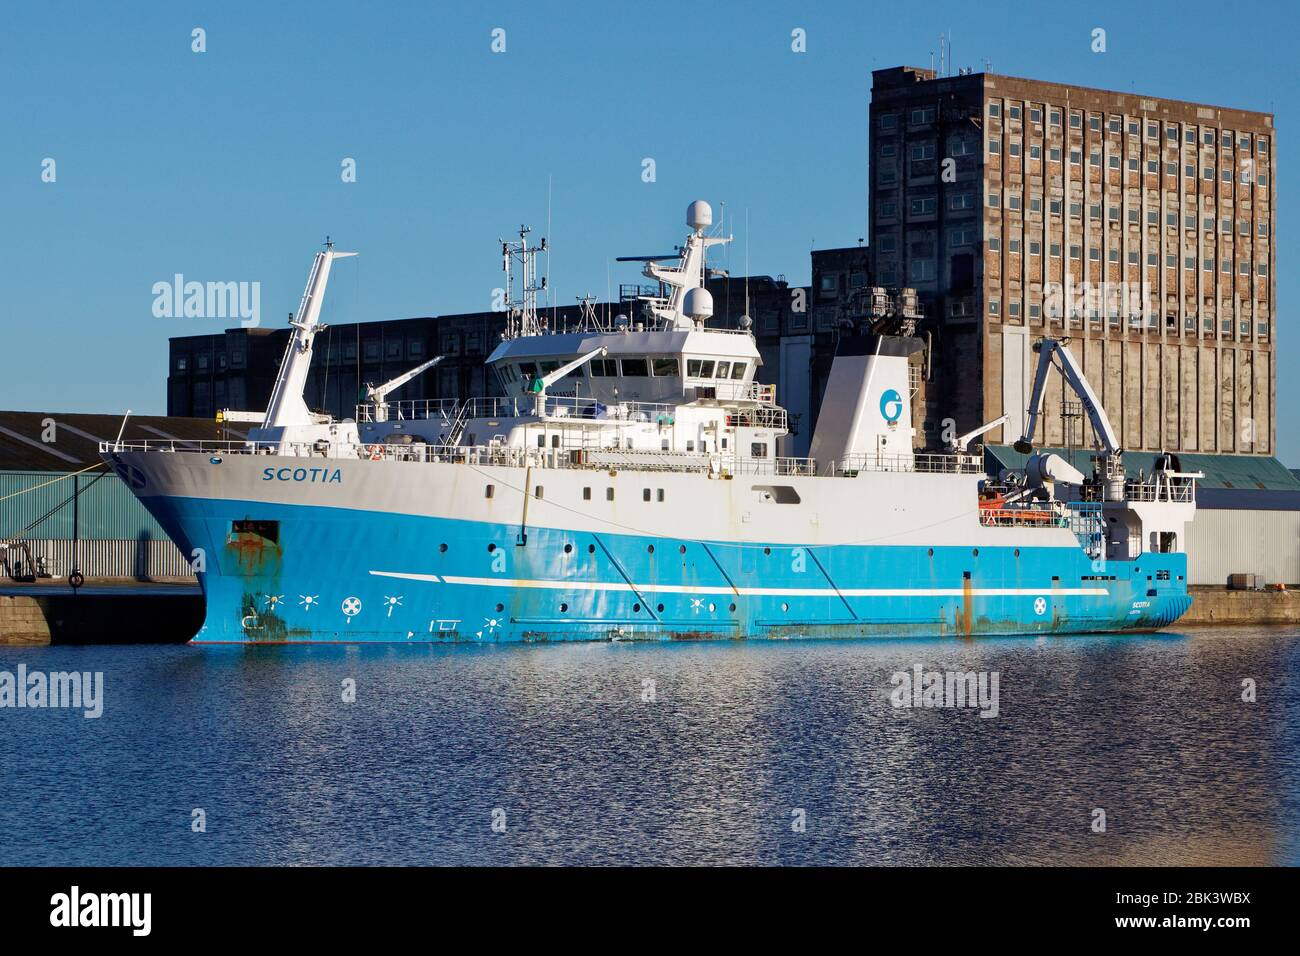 Fisheries research vessel (Scotia) berthed at the Port of Leith in Edinburgh Stock Photo